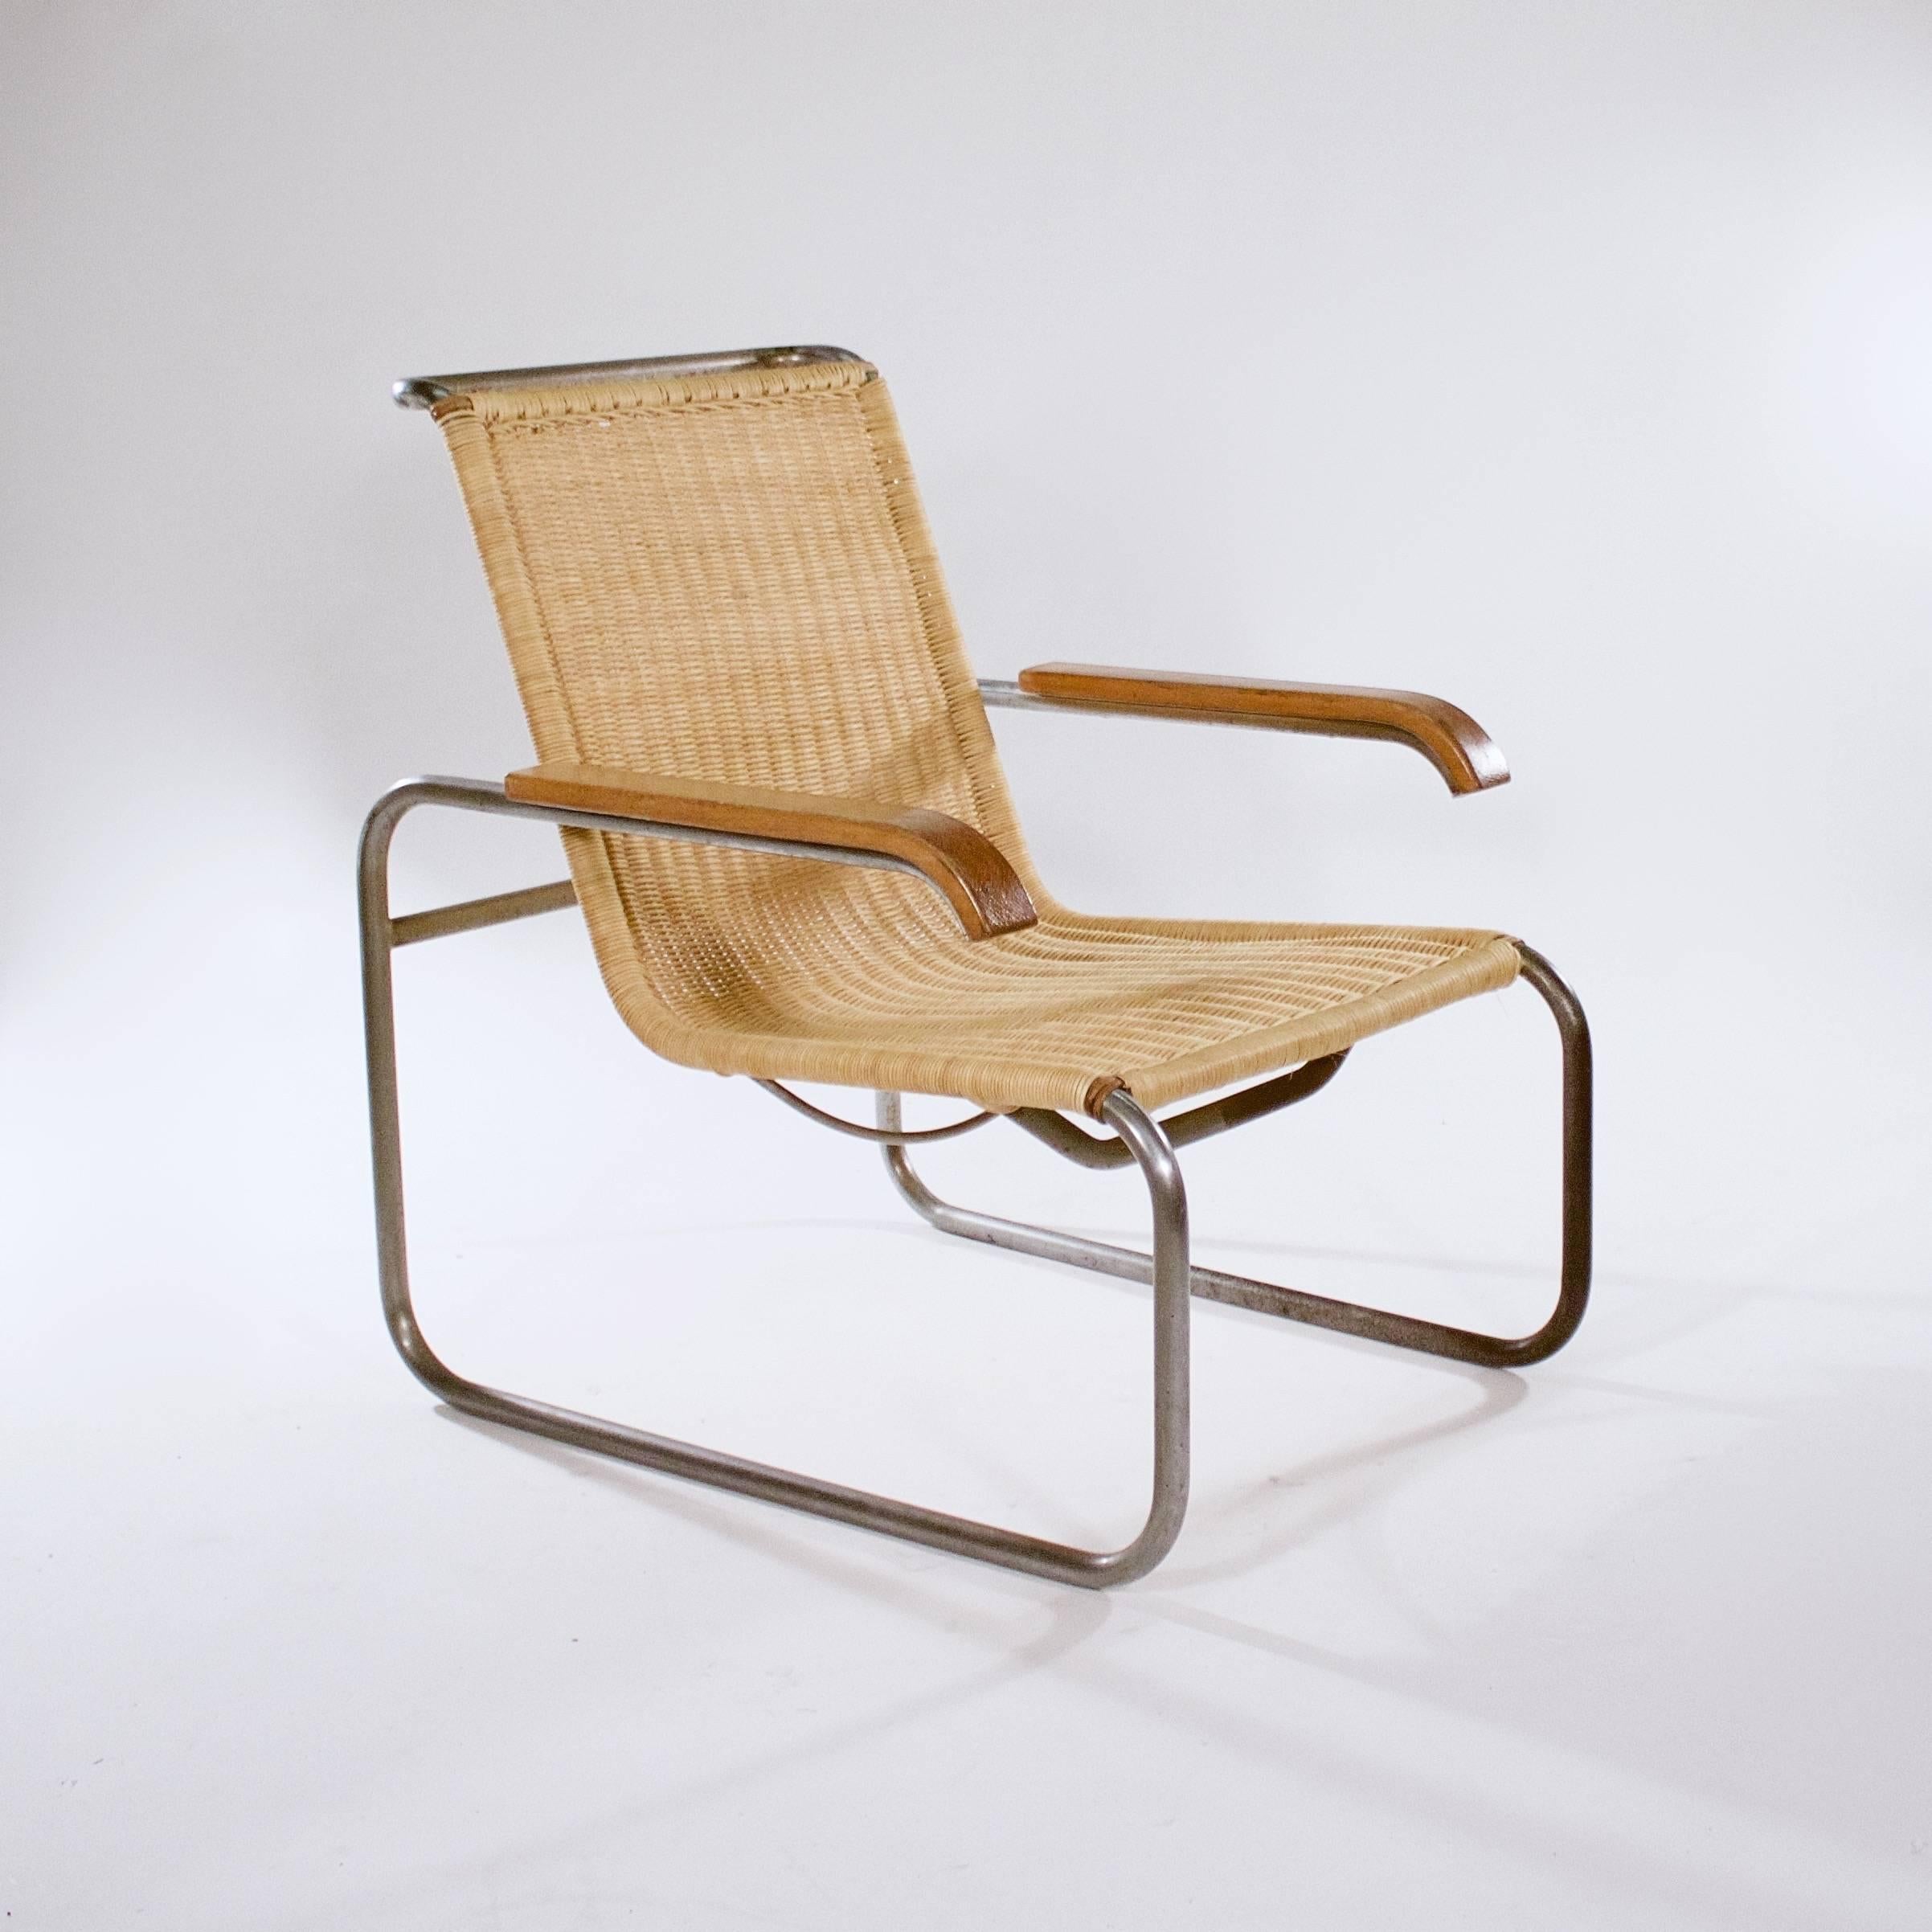 A 'B35' tubular metal and wicker armchair. Designed in 1928 and manufactured by Thonet. 

This model, circa 1940s.